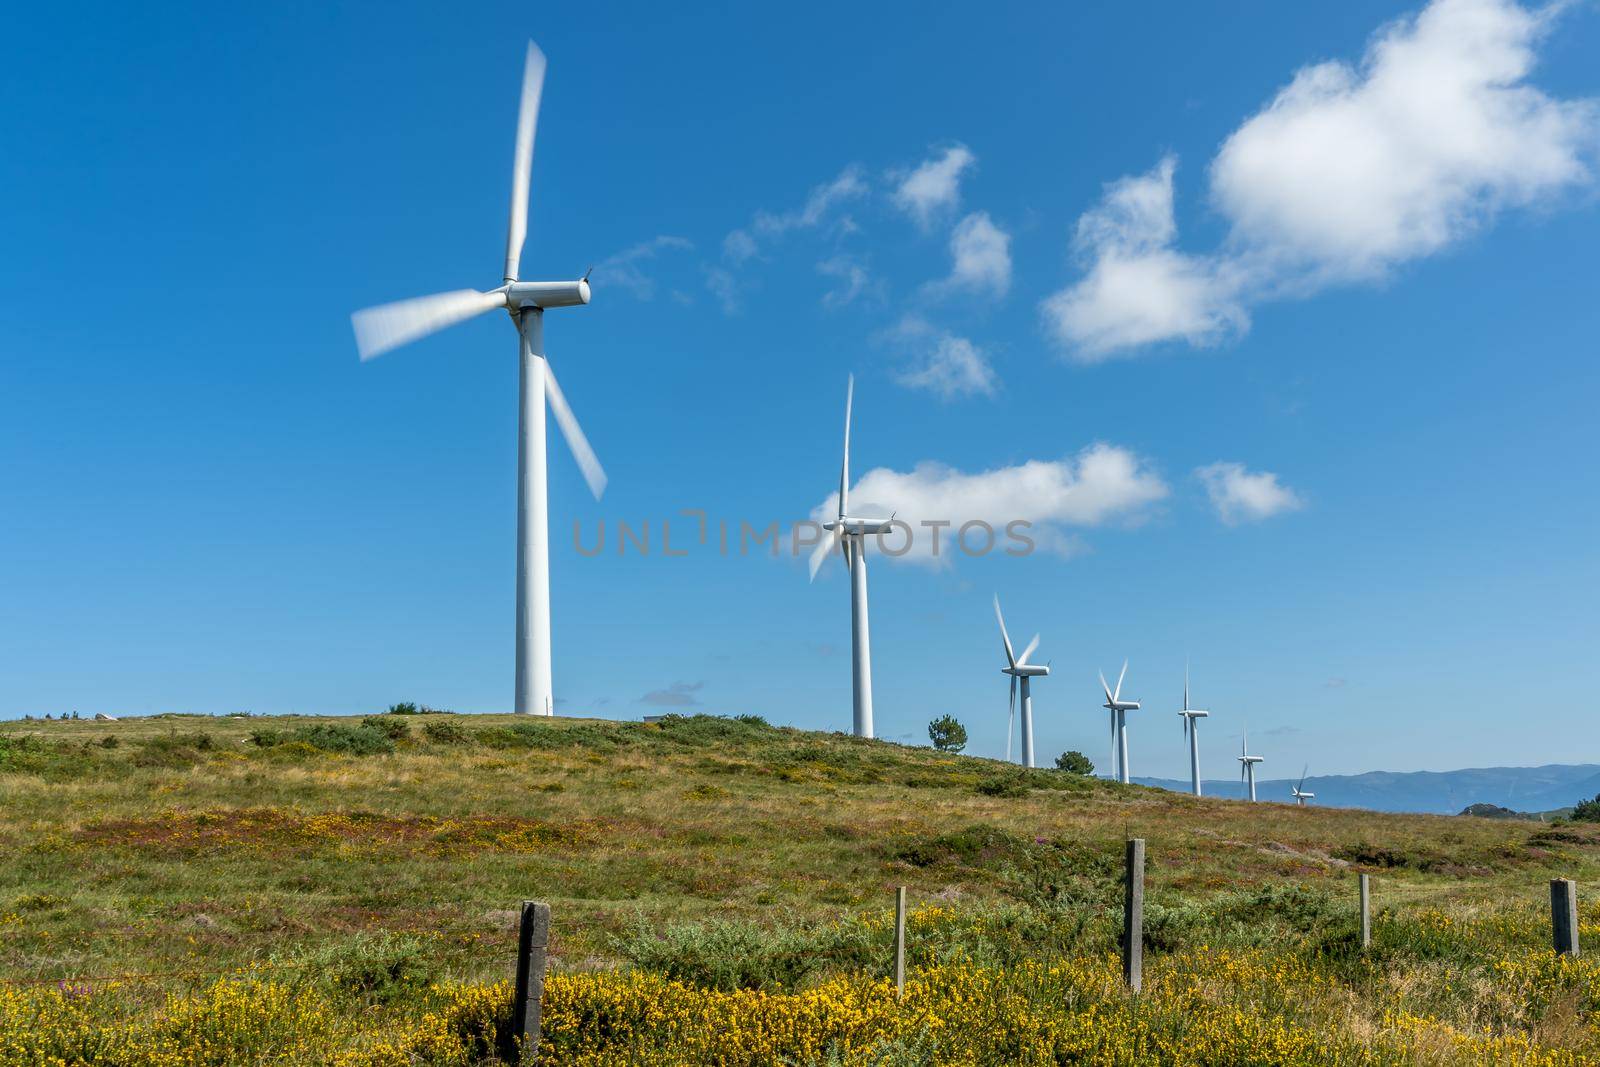 View of wind turbines energy production near the Atlantic Ocean in Galicia, Spain.